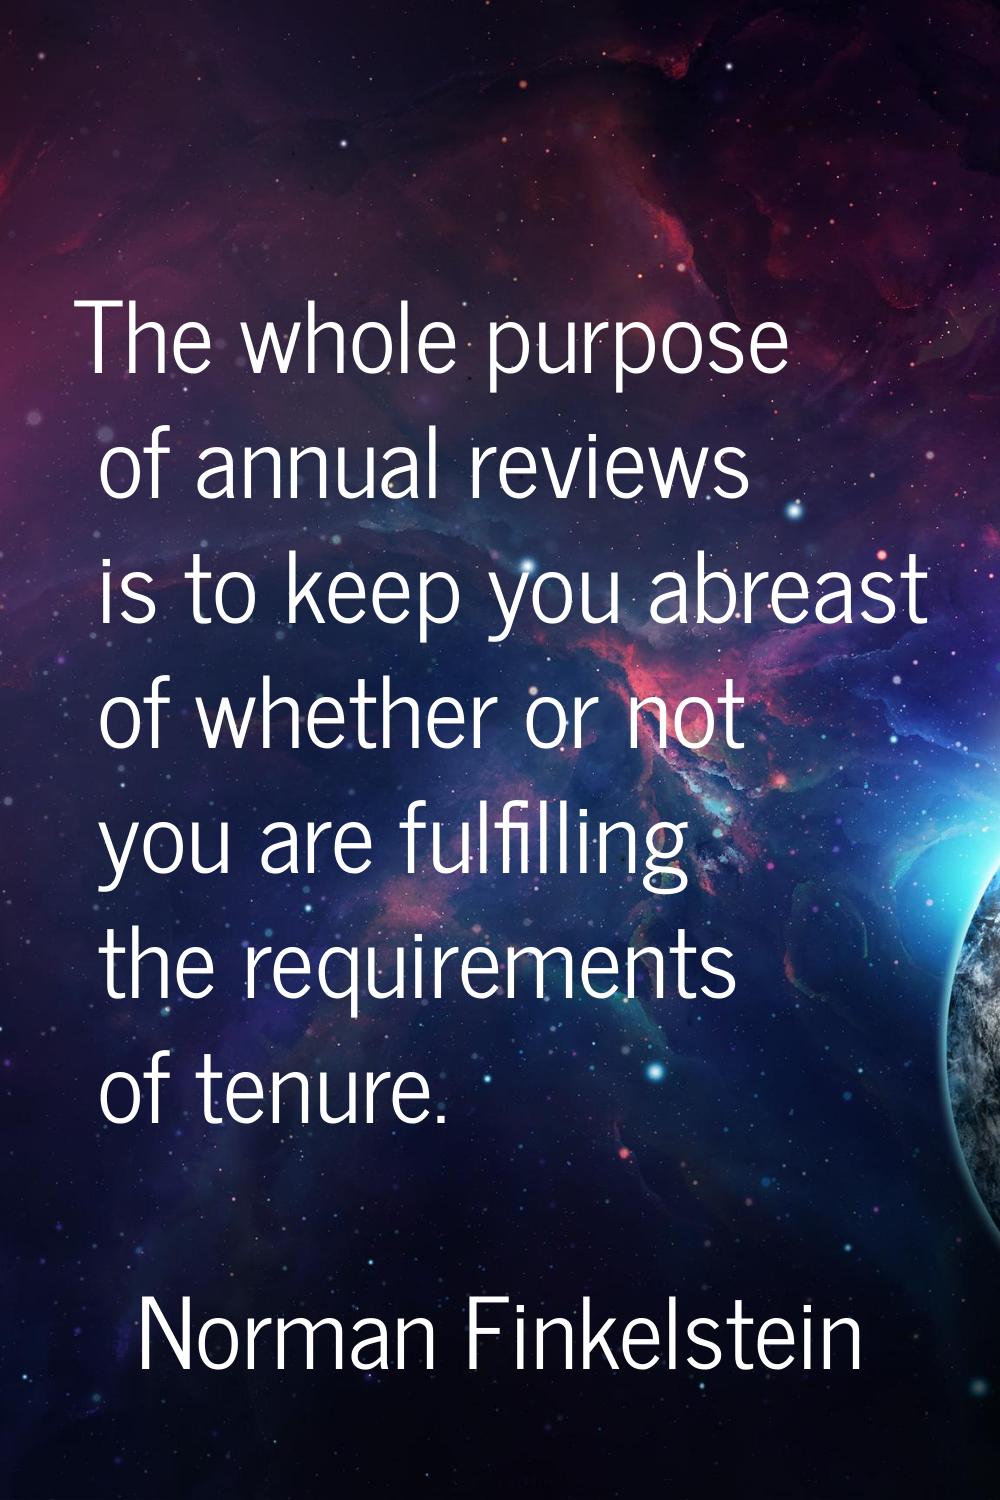 The whole purpose of annual reviews is to keep you abreast of whether or not you are fulfilling the